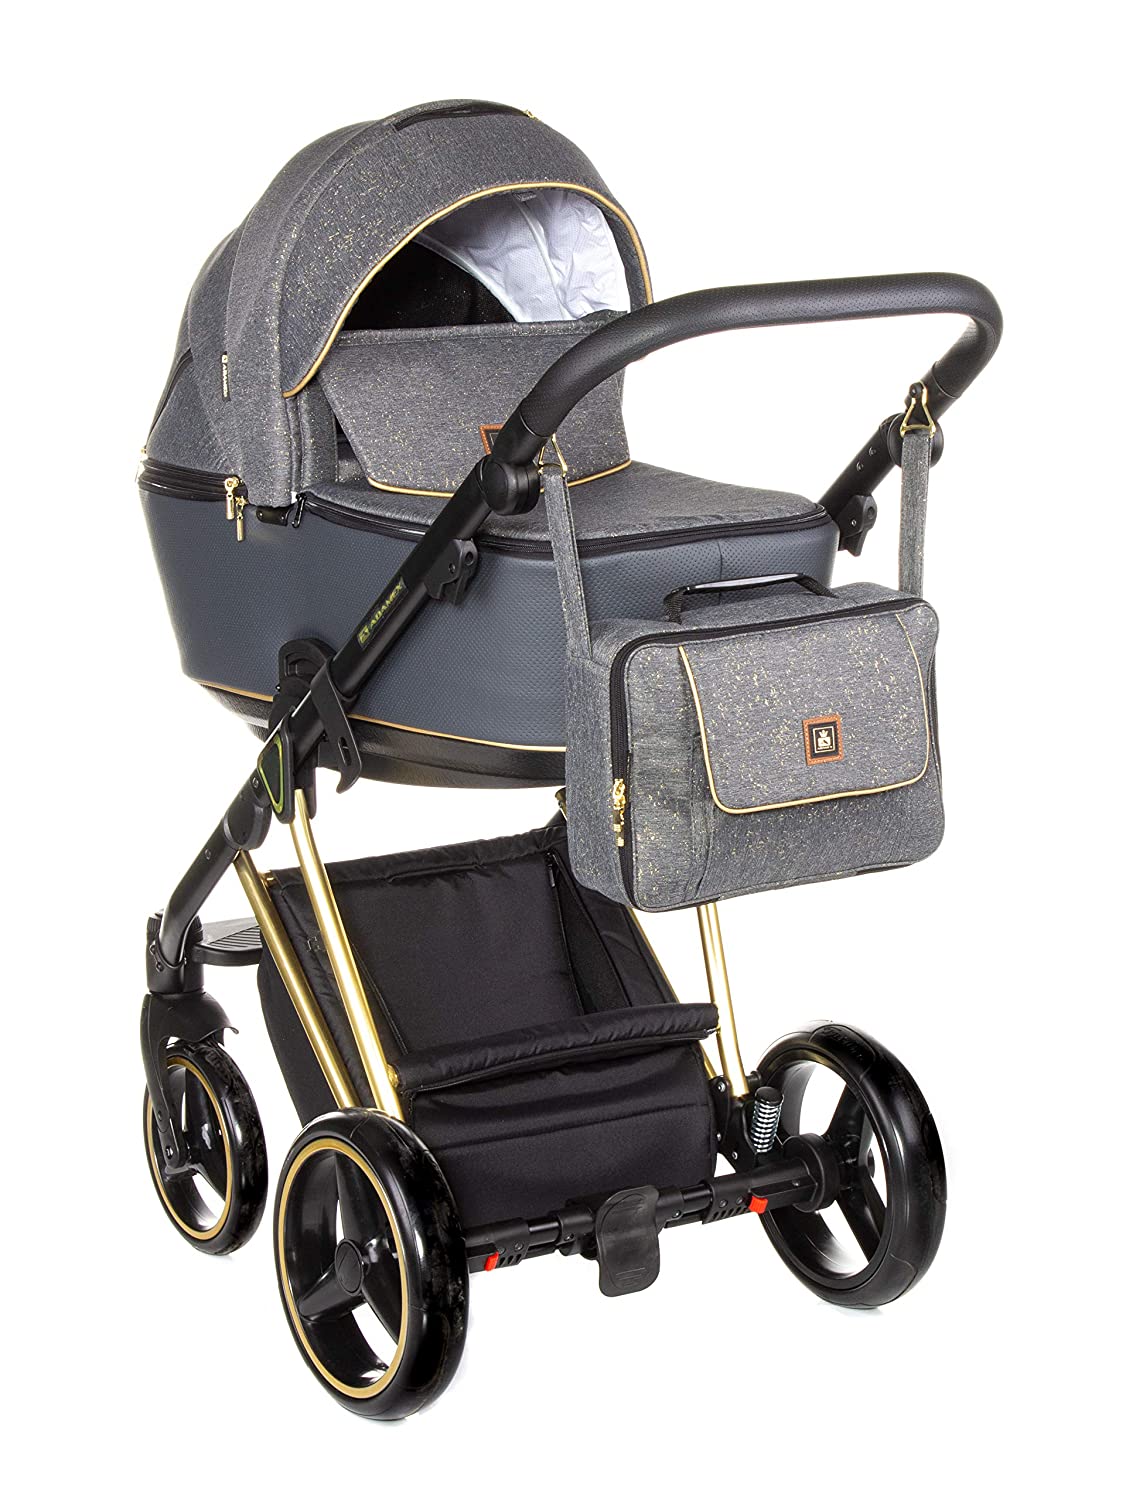 Adamex Cristiano Special Pushchair Complete Set + Neck Bag with Changing Mattress + Film + Mosquito Net + Cup Holder and Winter Muffs (CR-468 Graphite Gold, 3-in-1)